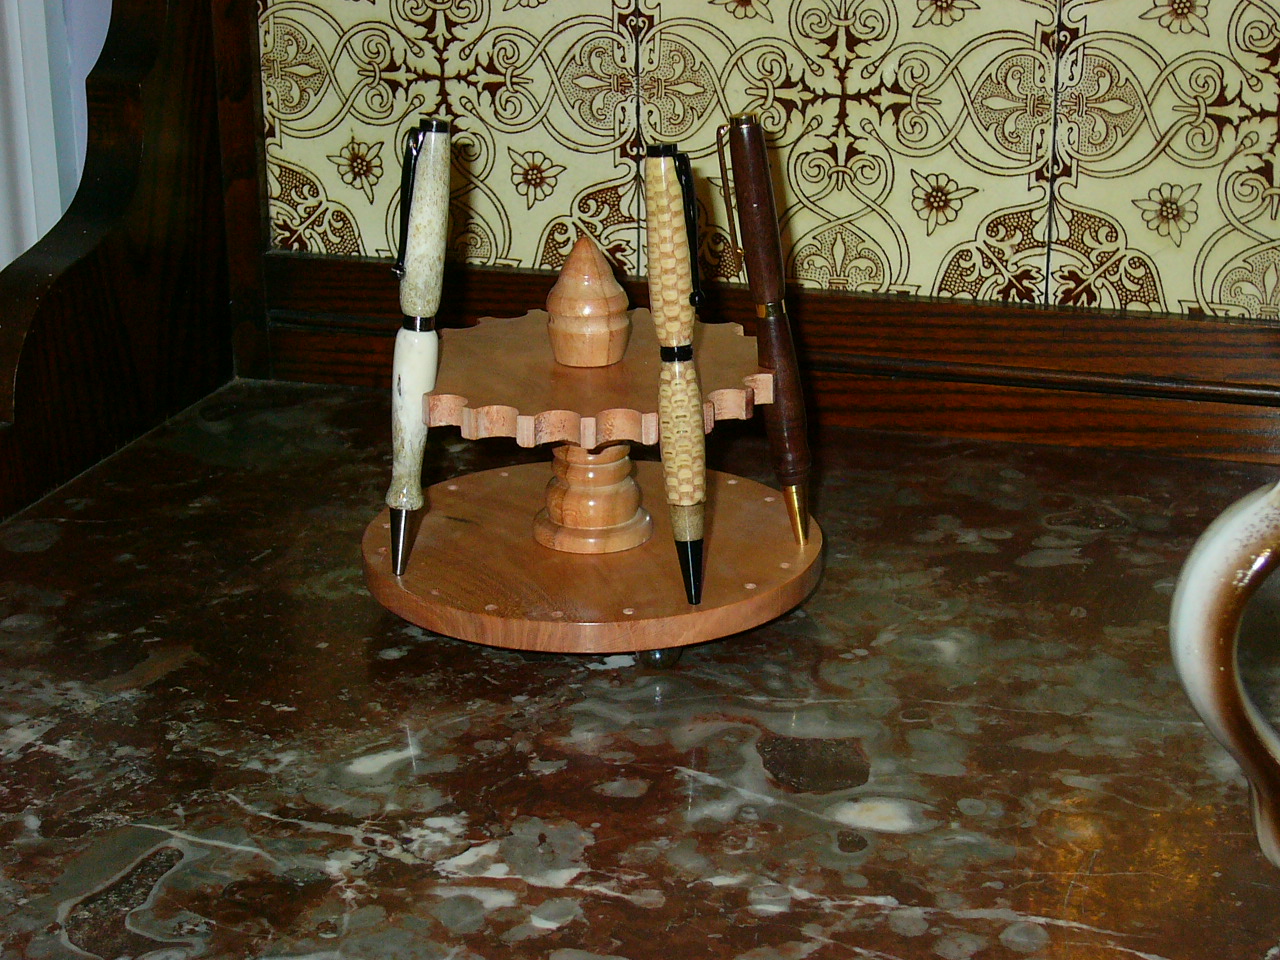 Pen stand front view